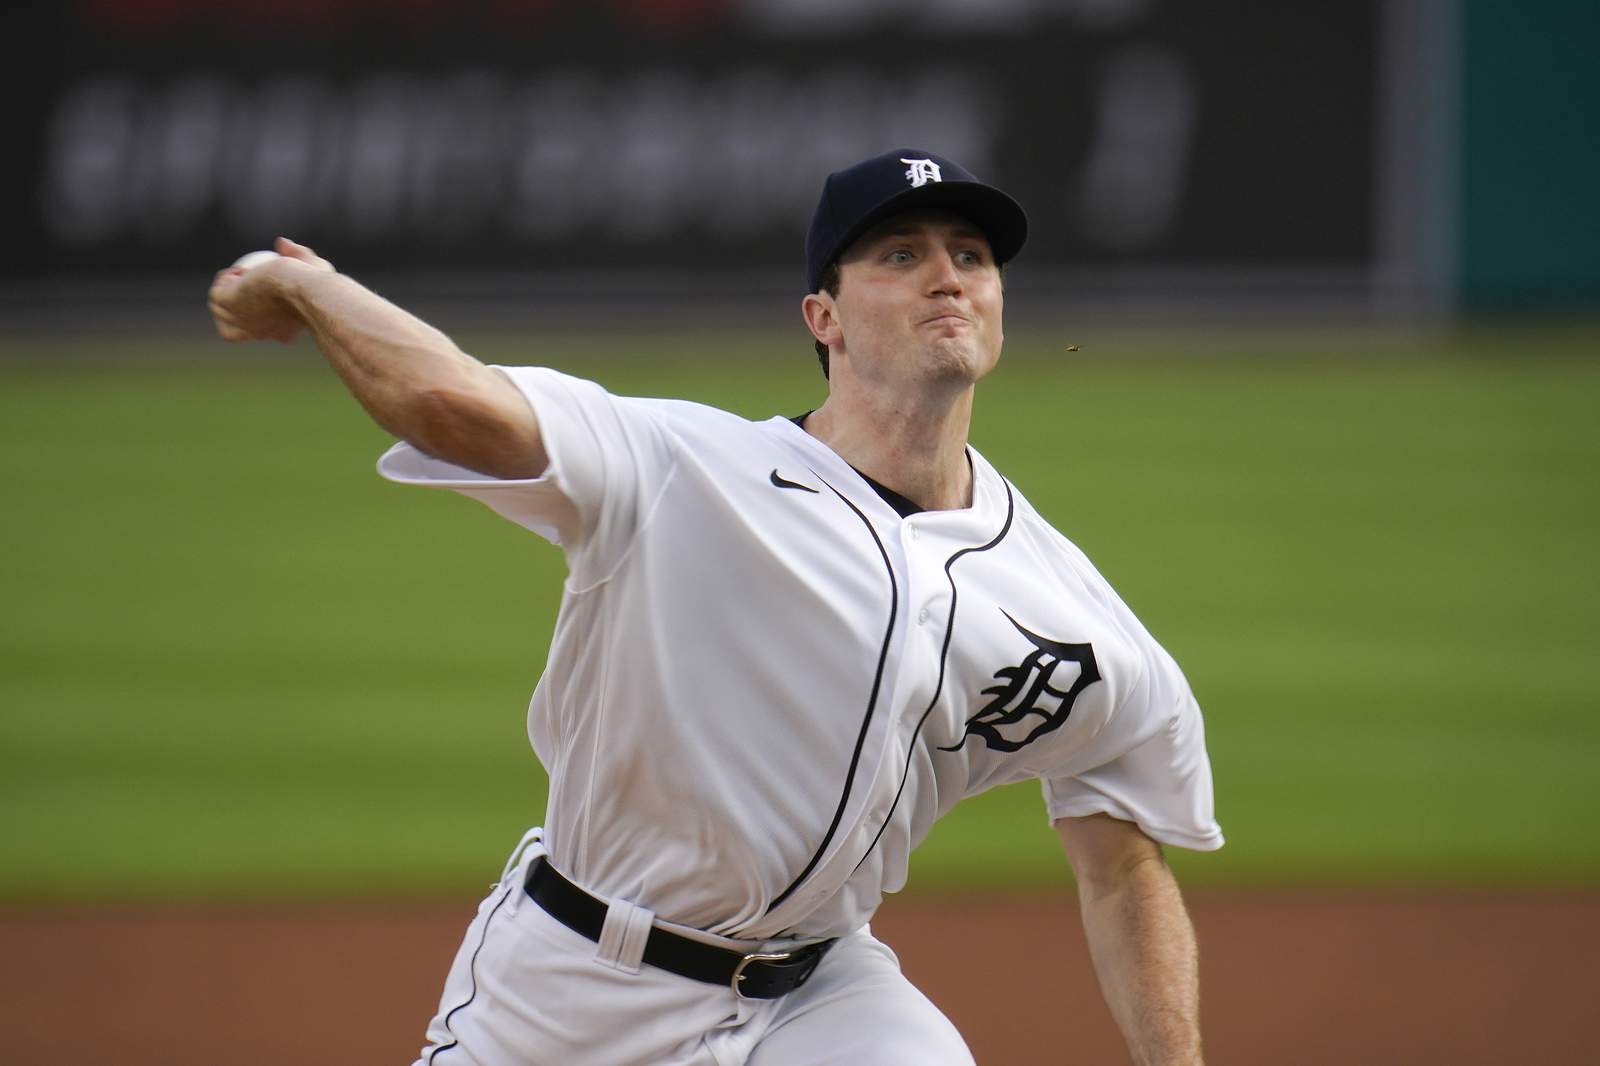 Happy Mize Day! Casey Mize strikes out the side in first inning of season